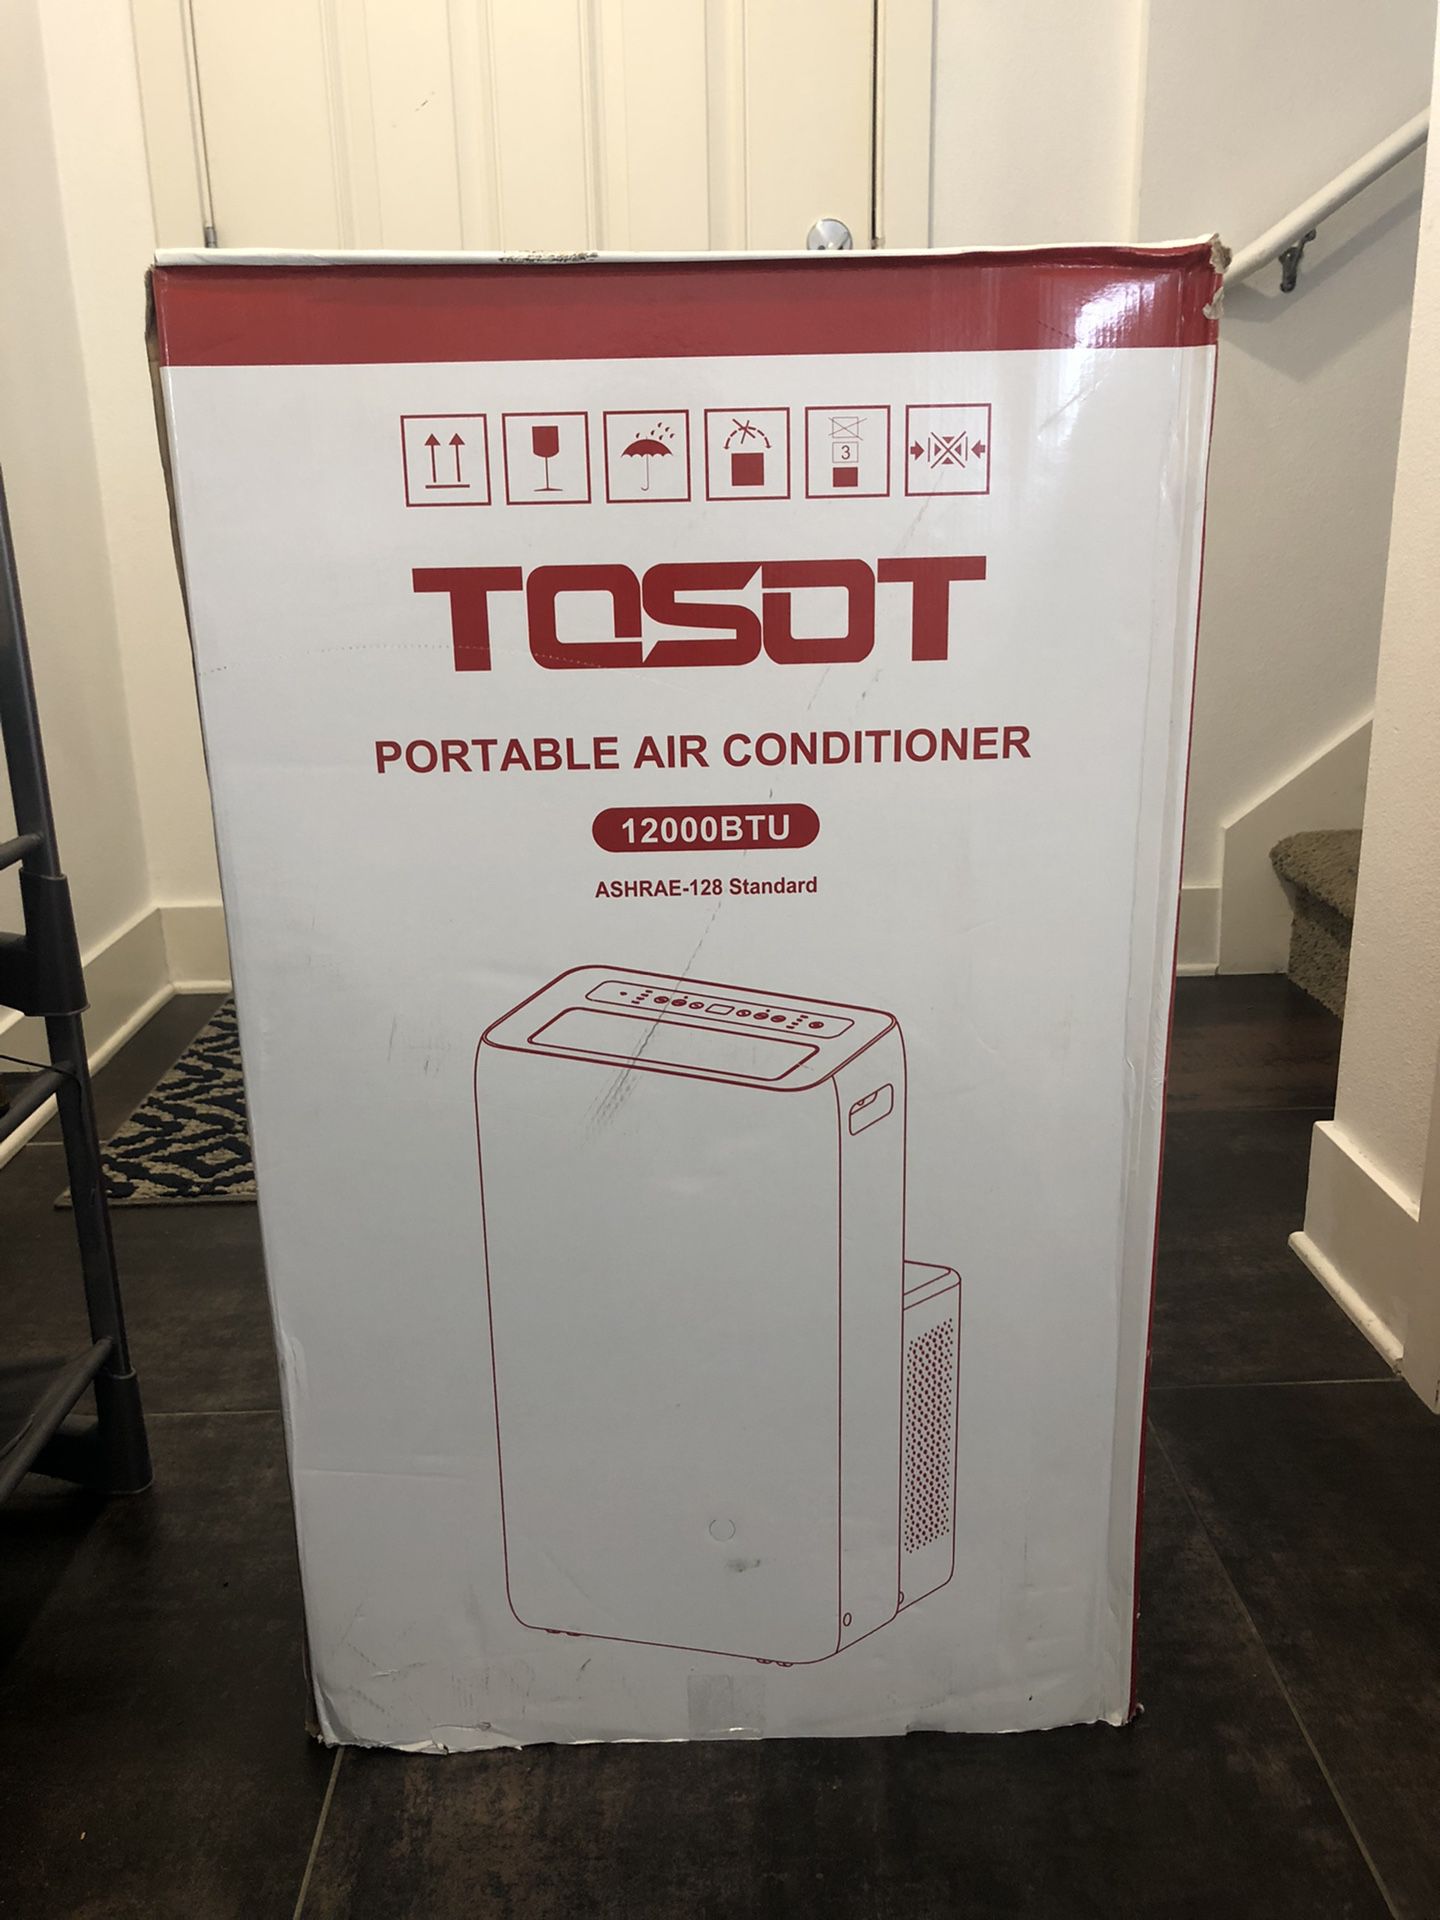 Portable Air Conditioner Unit By TOSOT - Like New! 